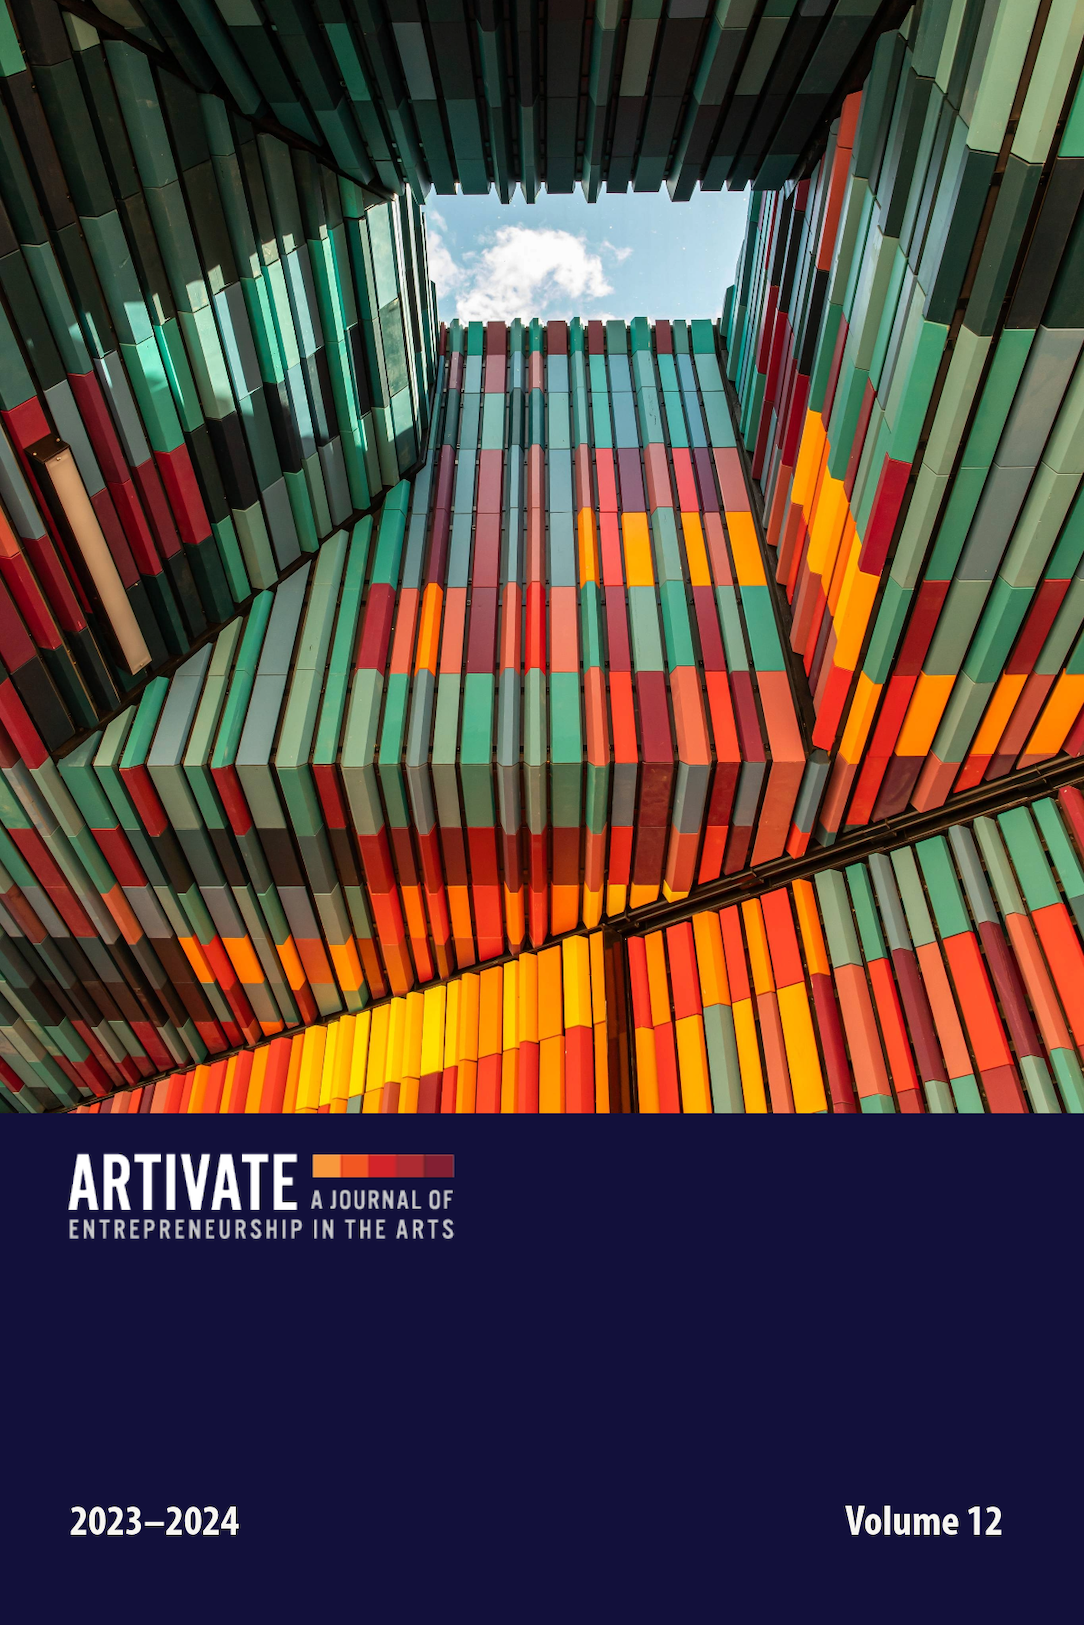 Cover image of Volume 12, featuring a photo of multi-color tiles in a geometric pattern on the roof of a building.